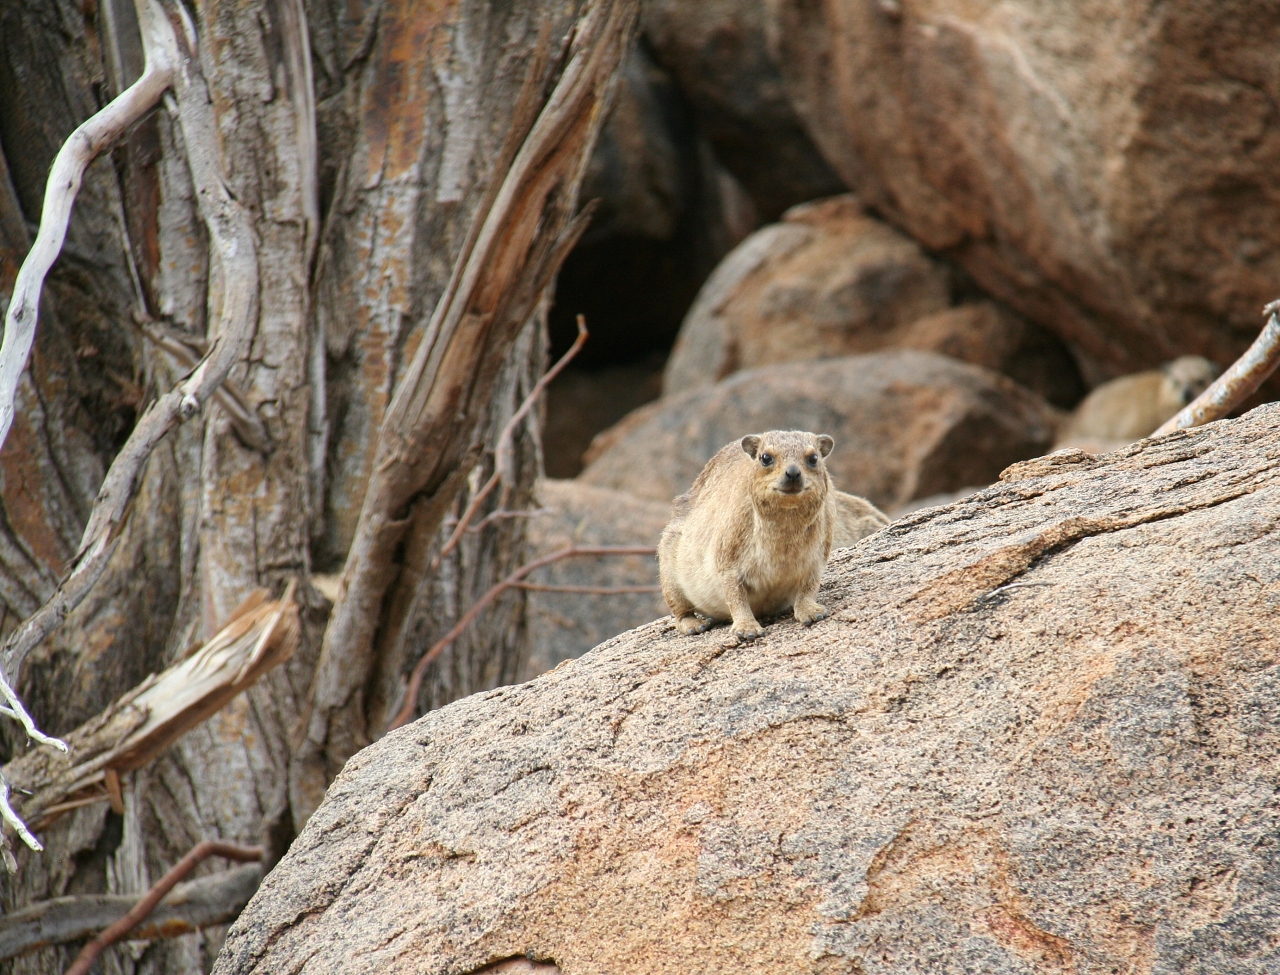 Forget their name. But they are basically curious rock vermin. *Correction: found out what they are. They are hyrax and while they look like rodents they are actually more closely related to elephants and manatees.